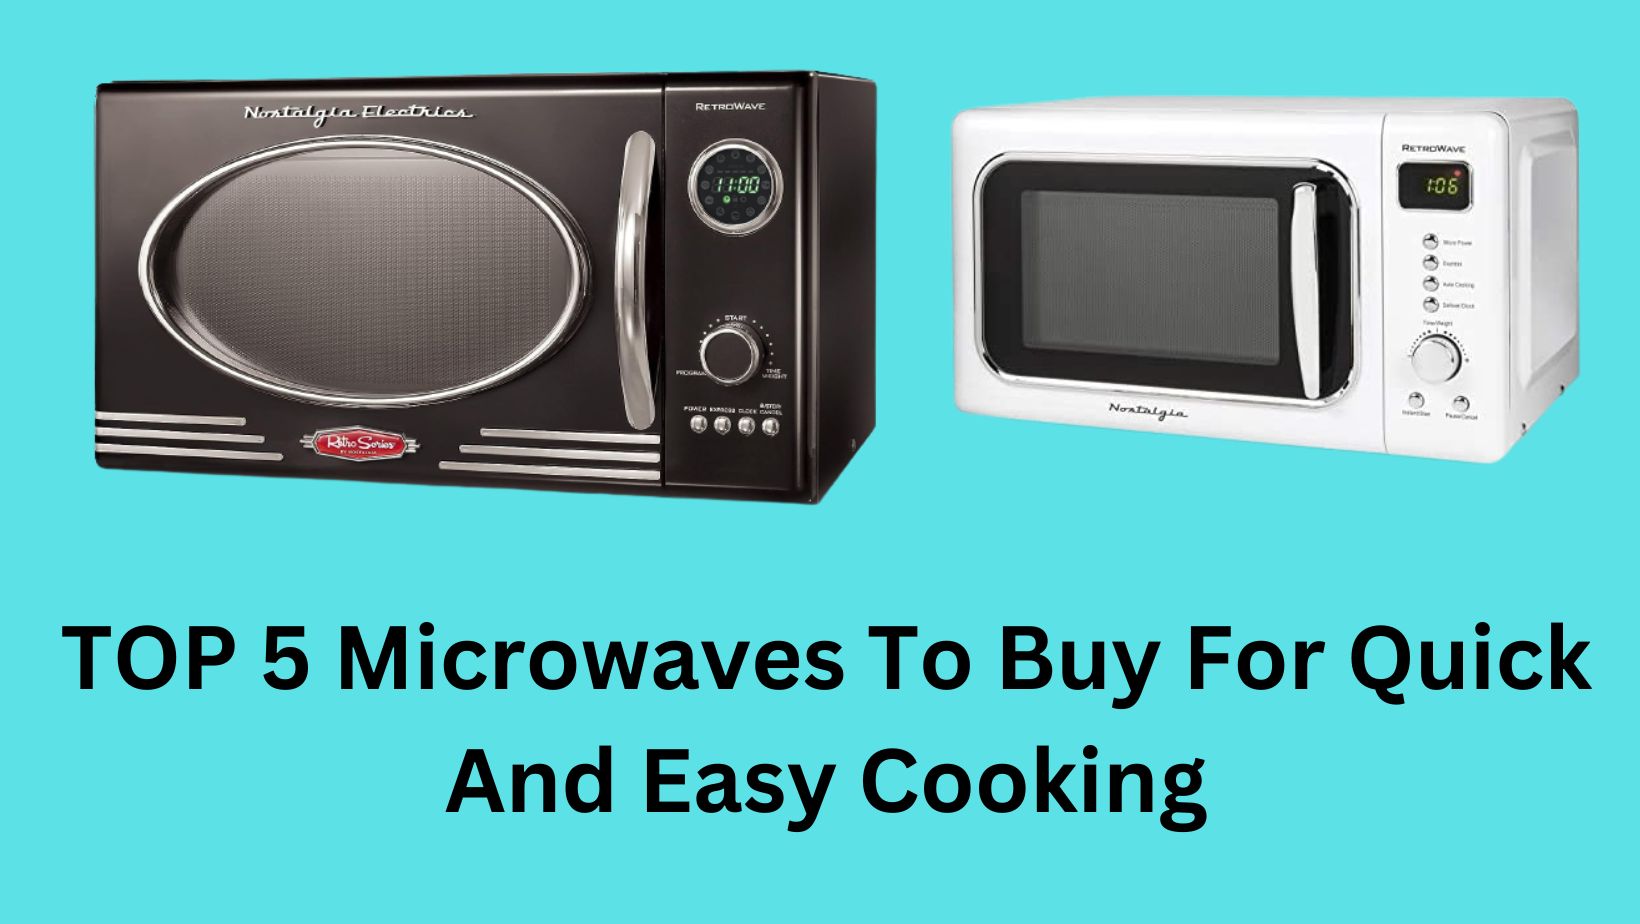 TOP 5 Microwaves To Buy For Quick And Easy Cooking